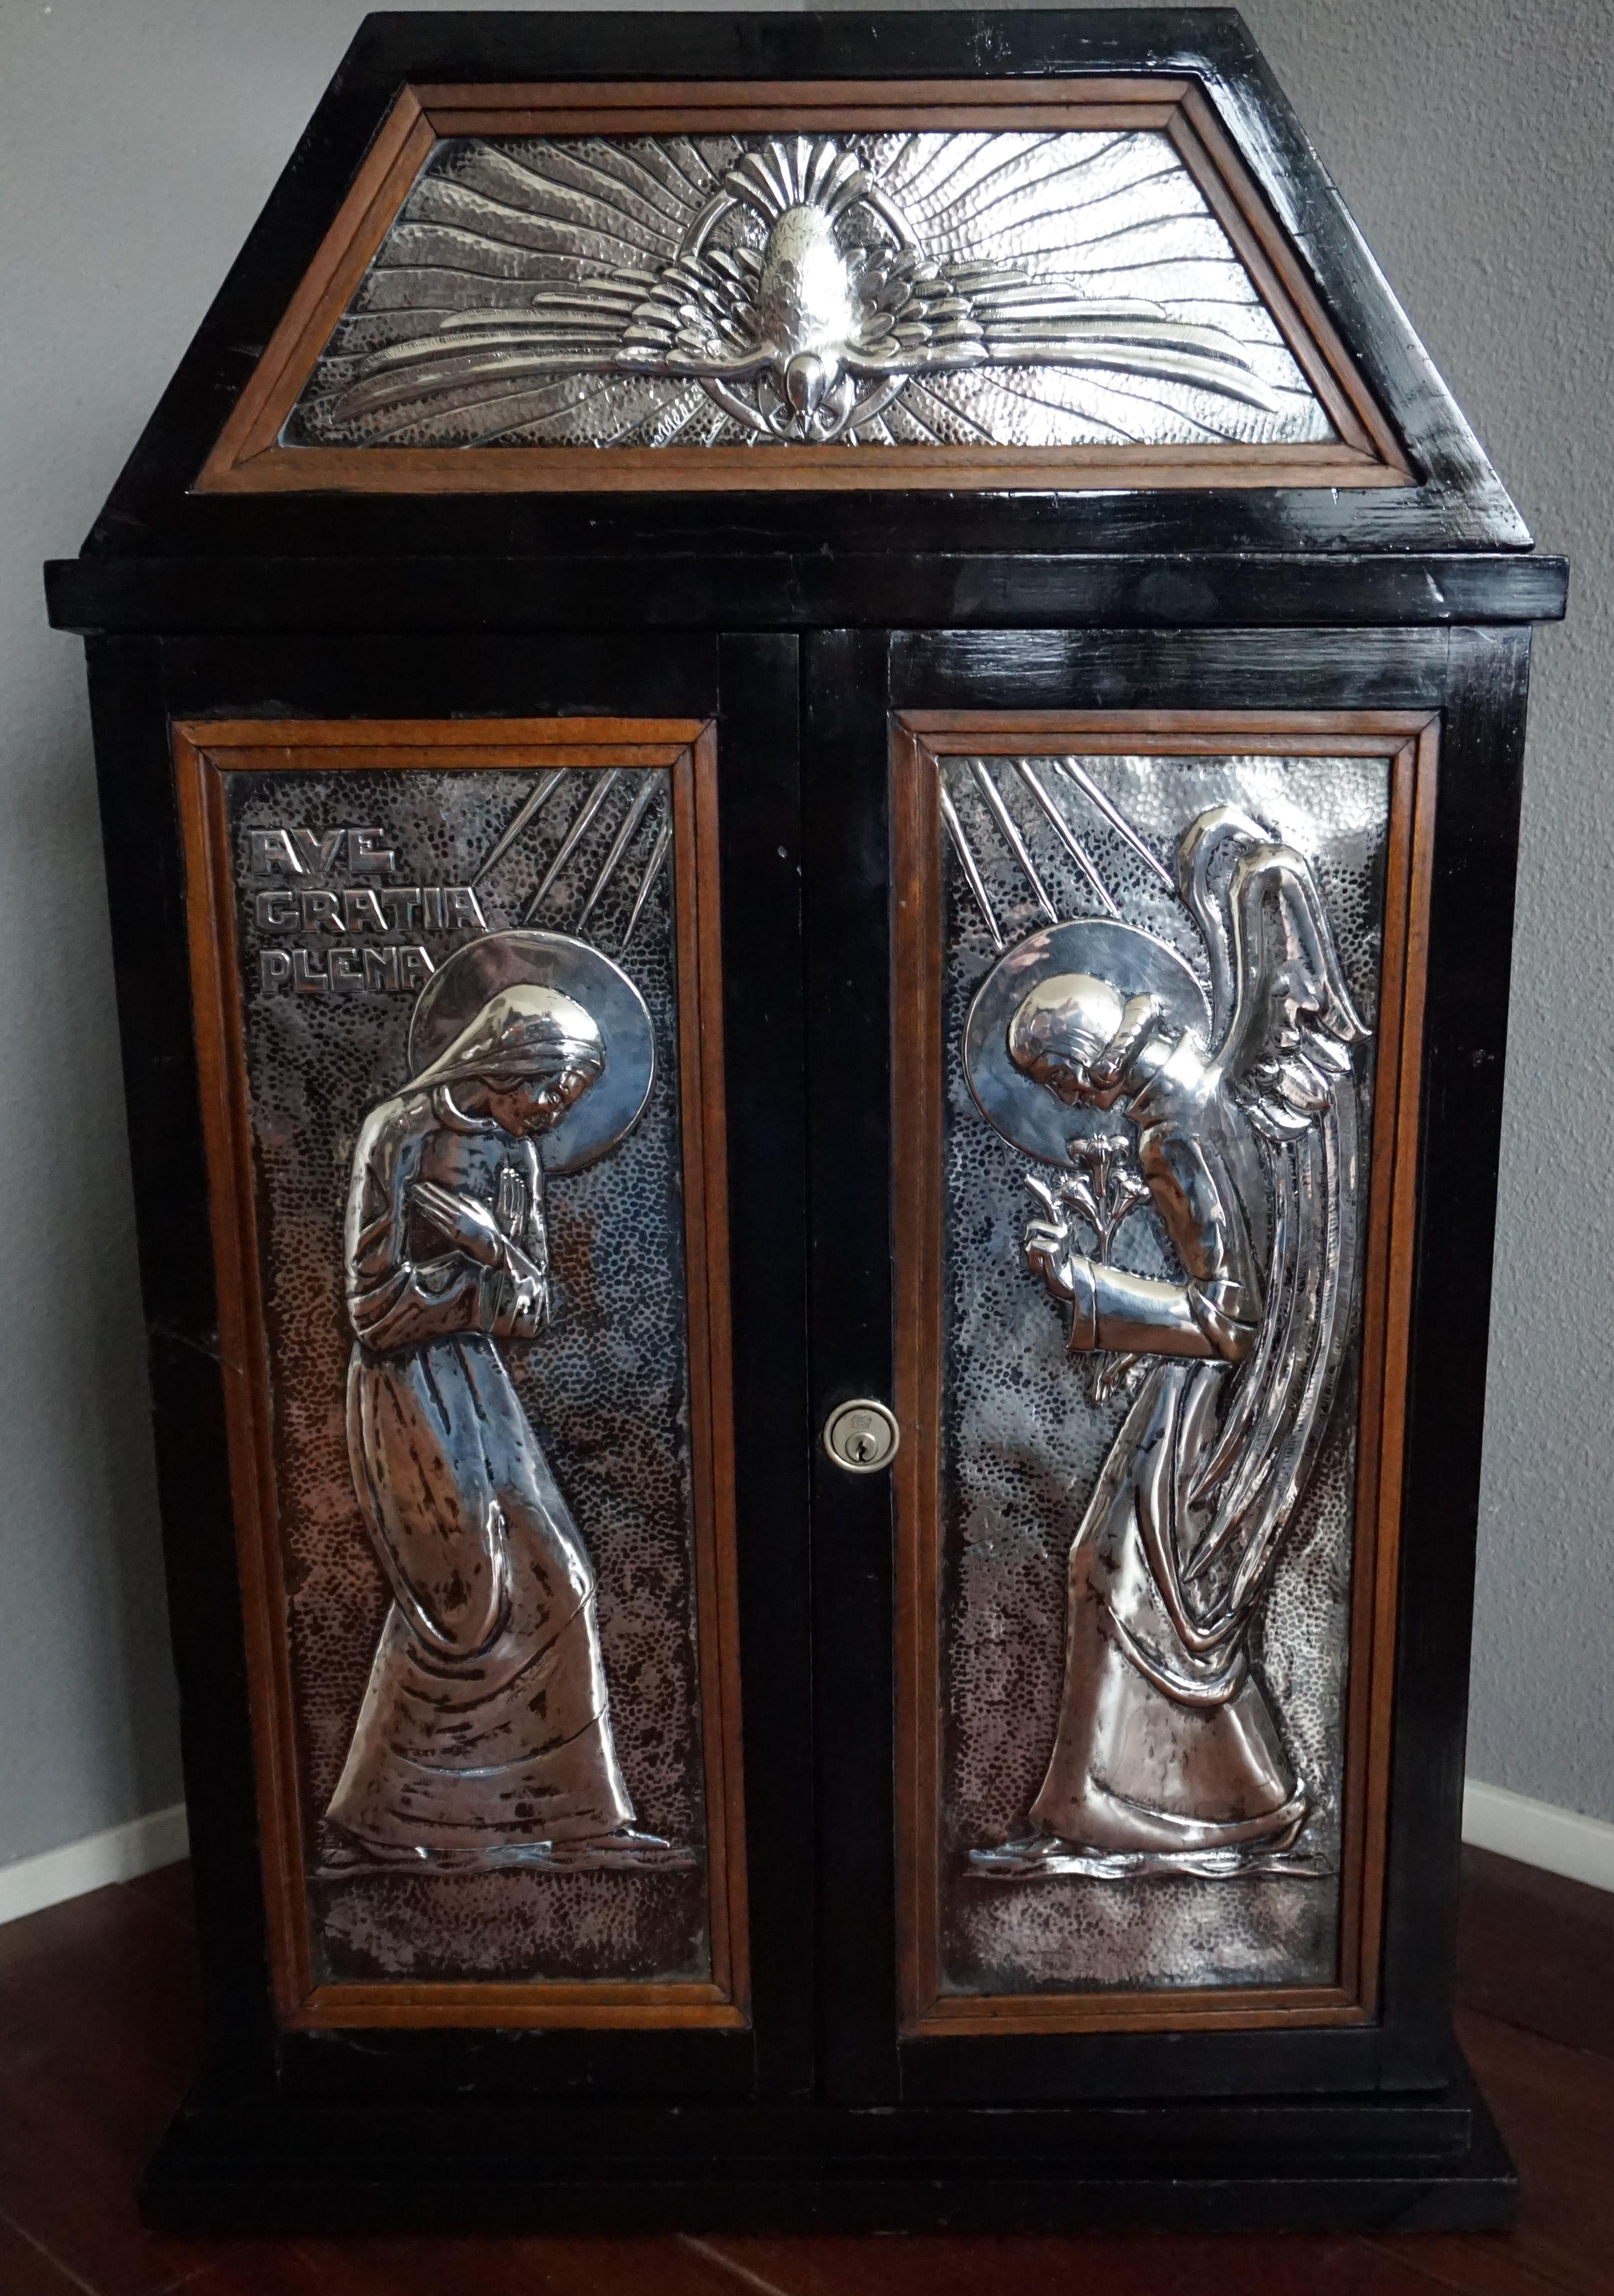 Religious artefact with stunning embossed and inlaid silver plaques.

Antique tabernacles are a rare find, so when we got the chance to purchase this early 20th century example we did not think twice. Especially, because of the stunning and sterling